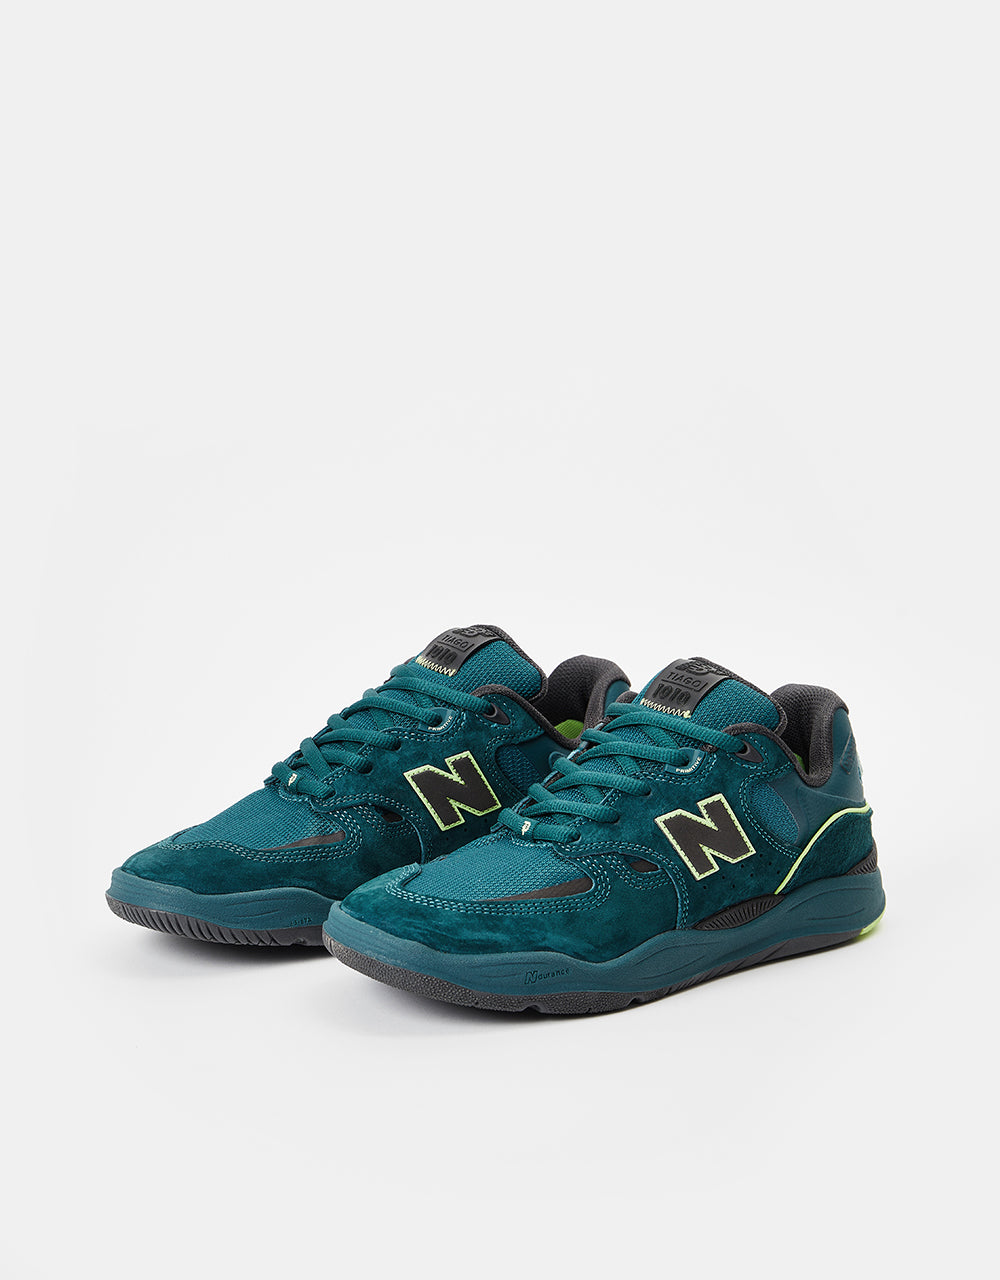 New Balance Numeric x Primitive 1010 Skate Shoes - Deep Teal/Lime Green